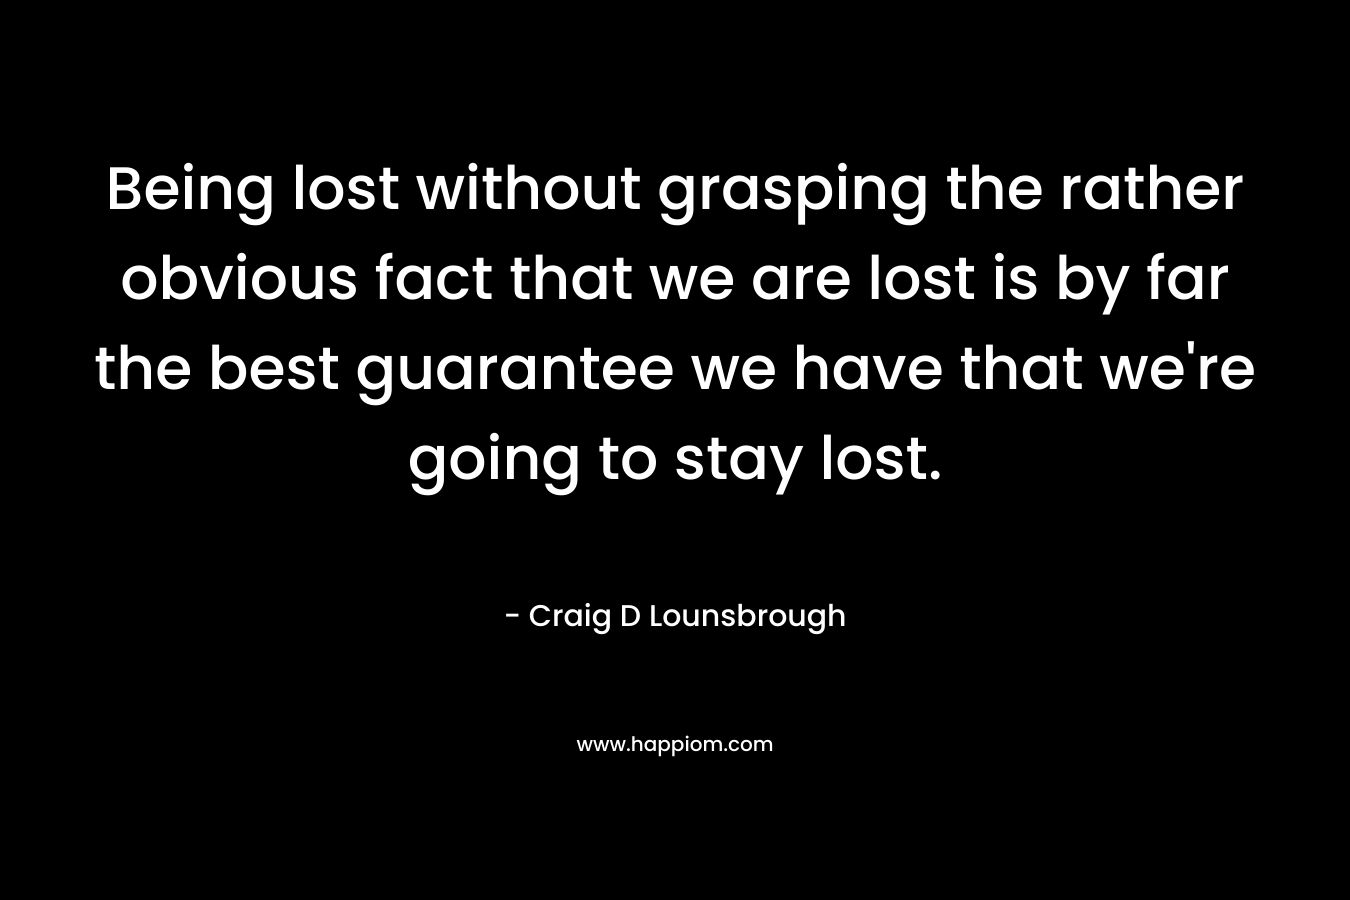 Being lost without grasping the rather obvious fact that we are lost is by far the best guarantee we have that we're going to stay lost.